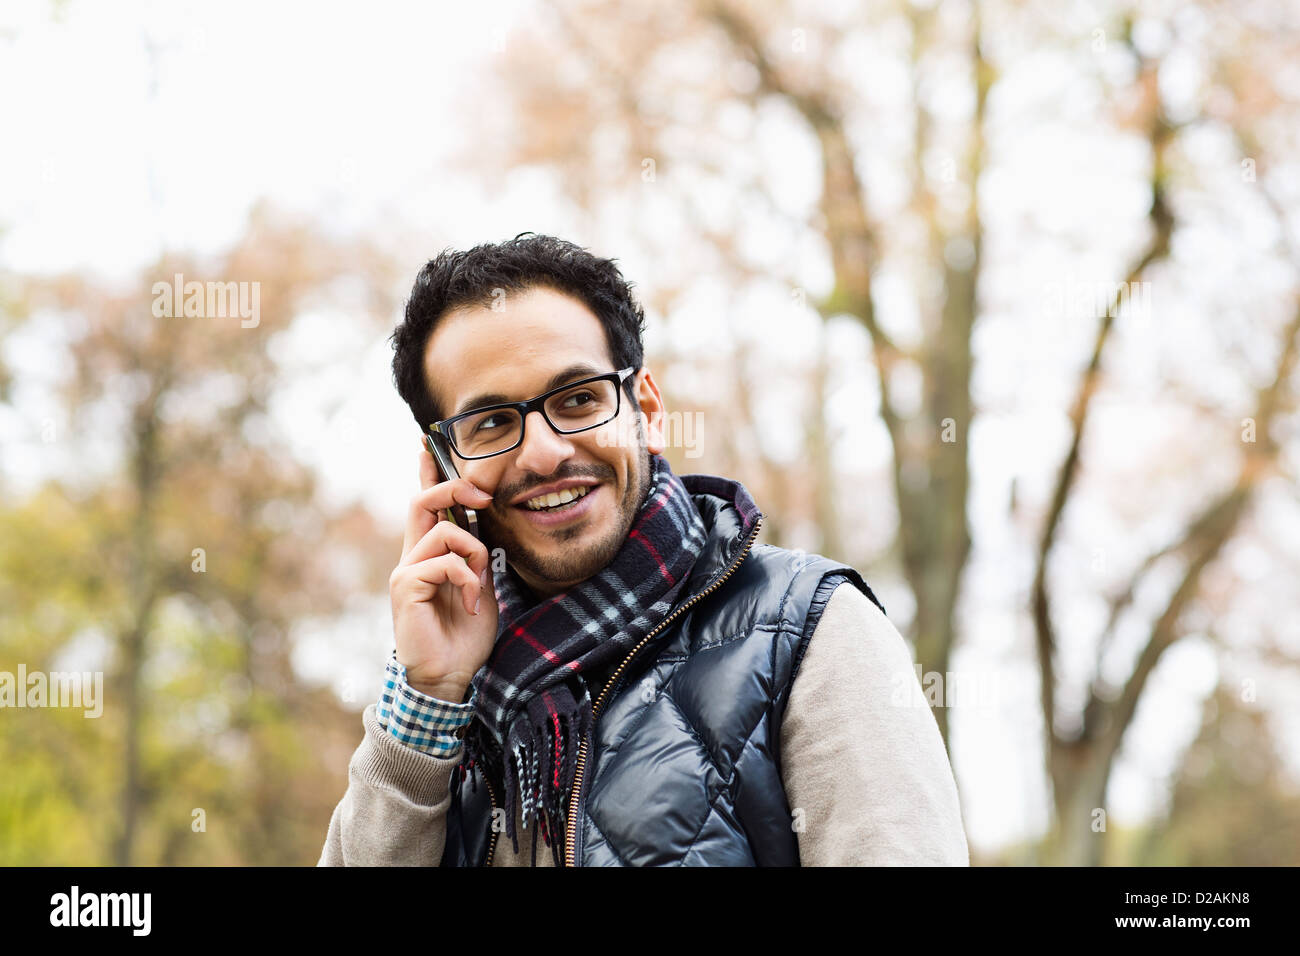 Man talking on cell phone in park Stock Photo